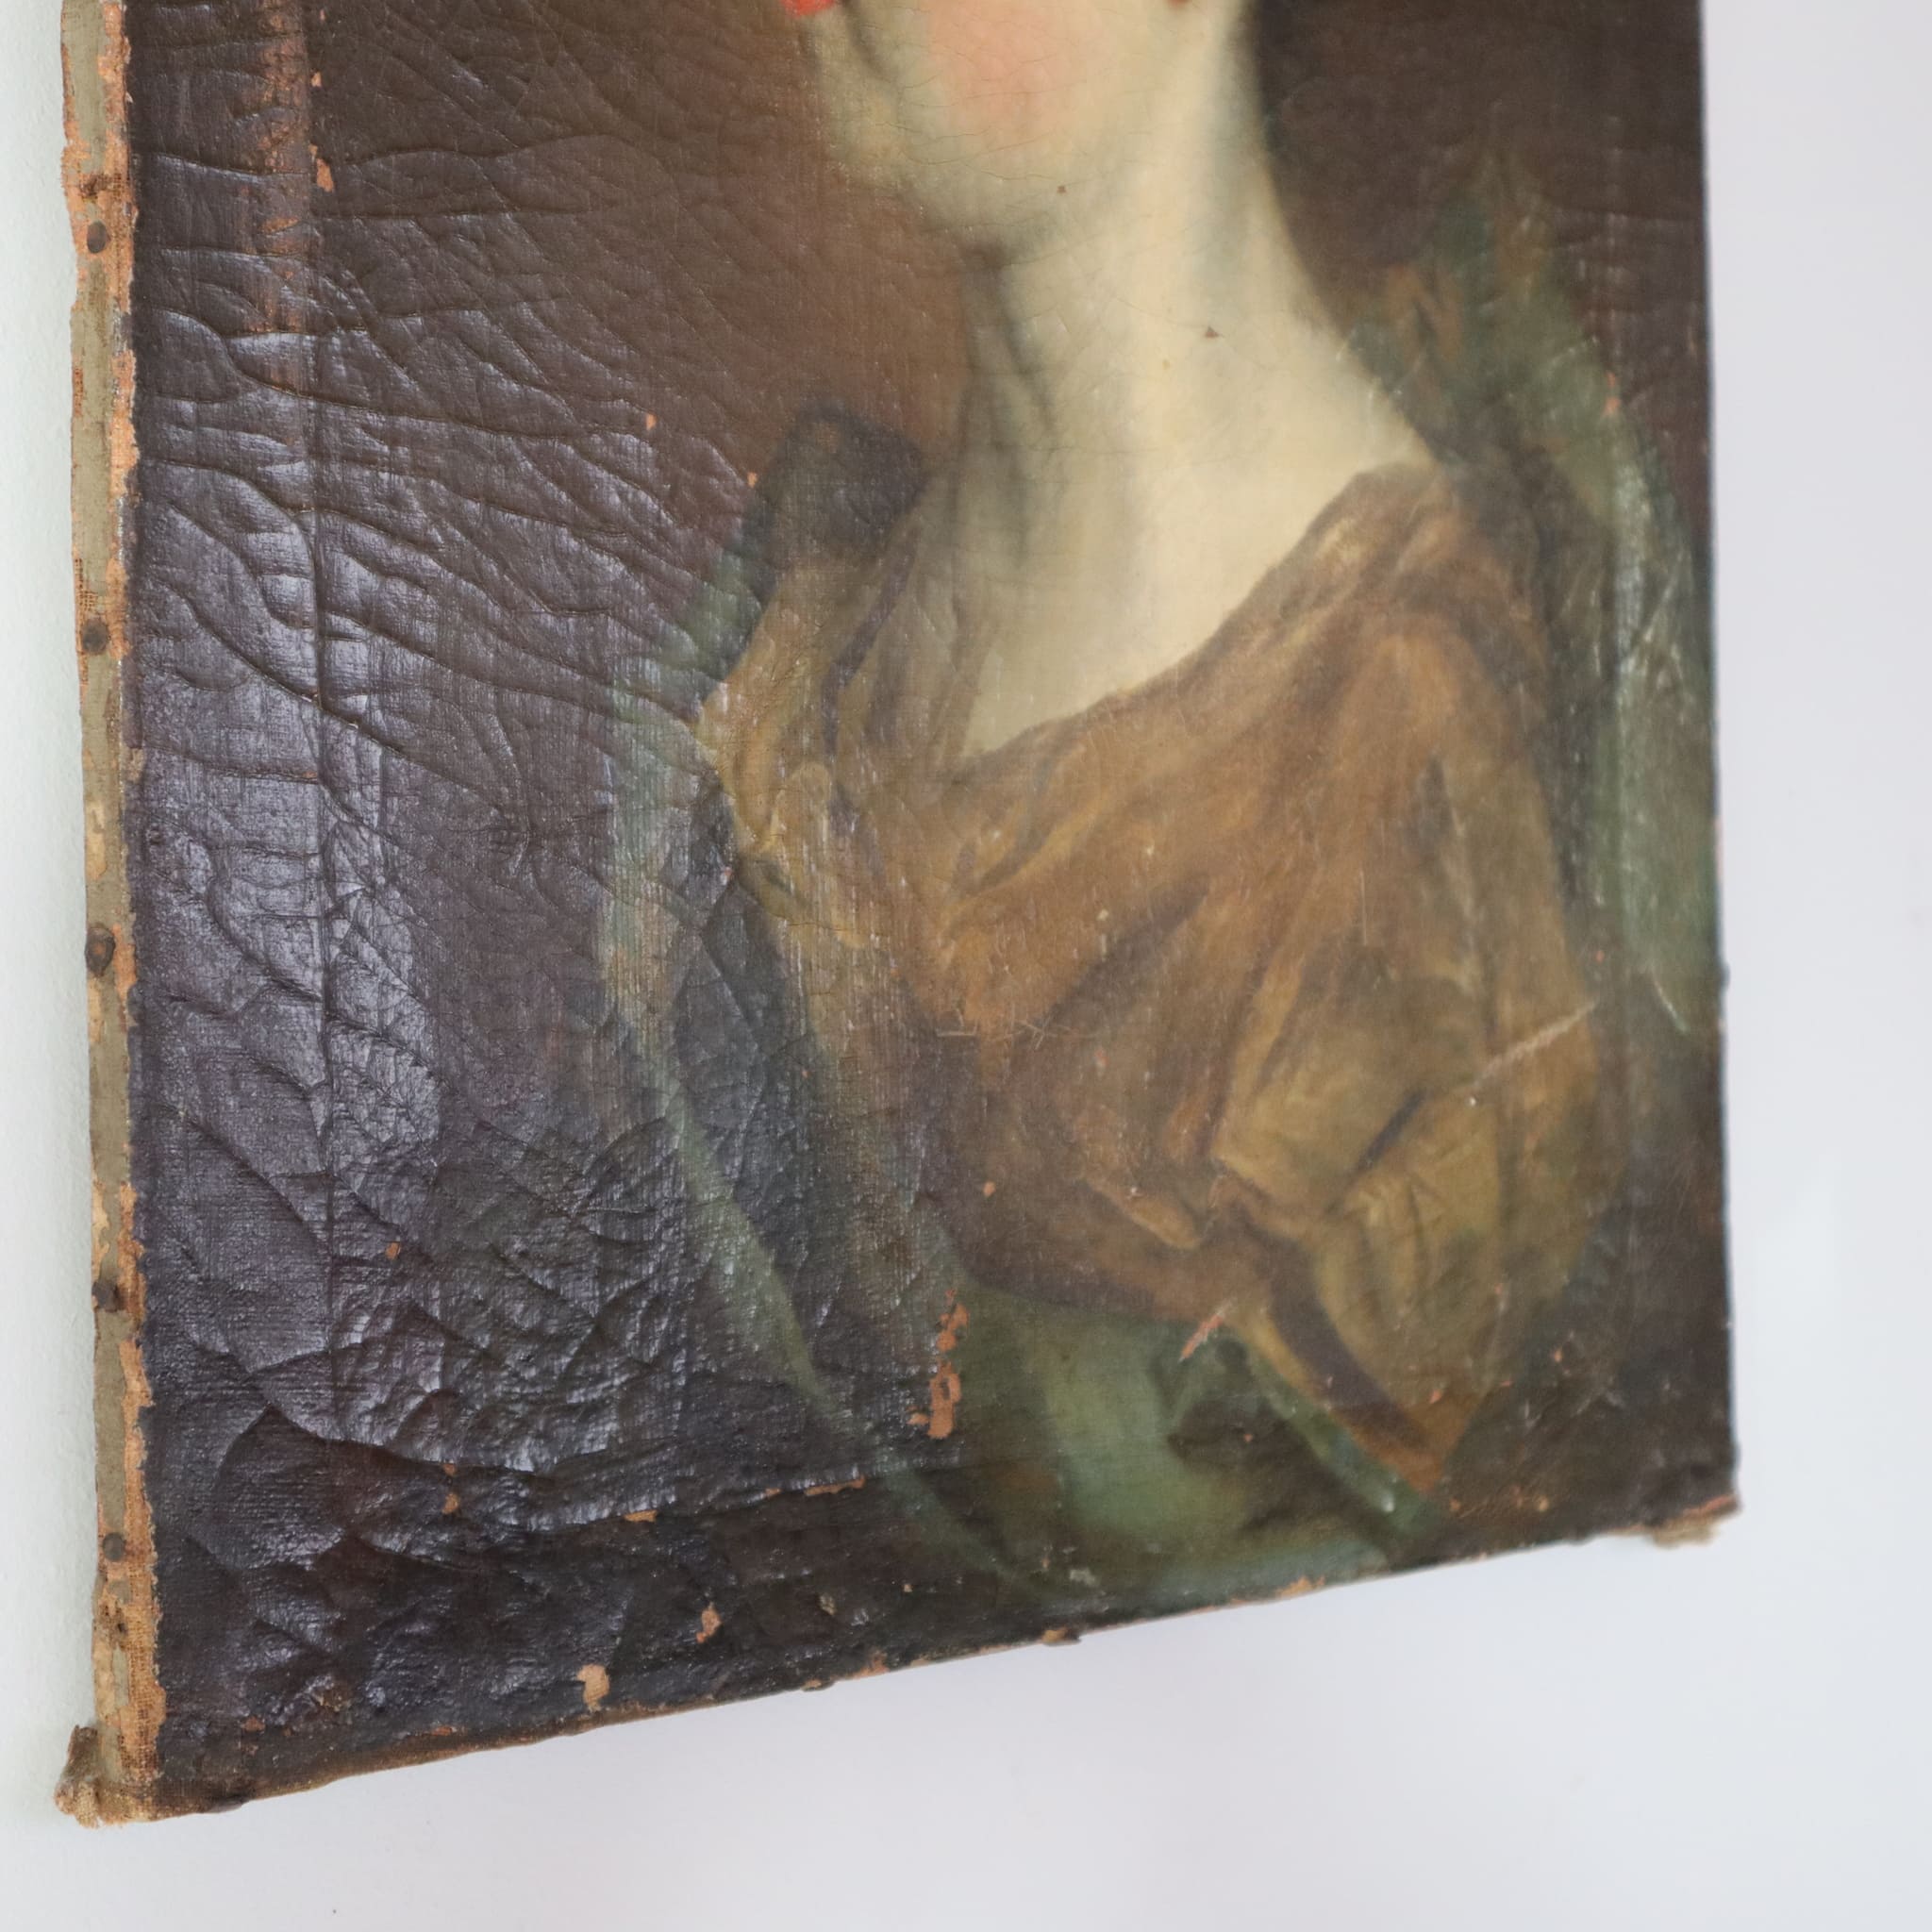 visionidepoca-antique-antique-painting-oil-on-canvas-french-noble-woman-made-in-france-of-1700-bust-view